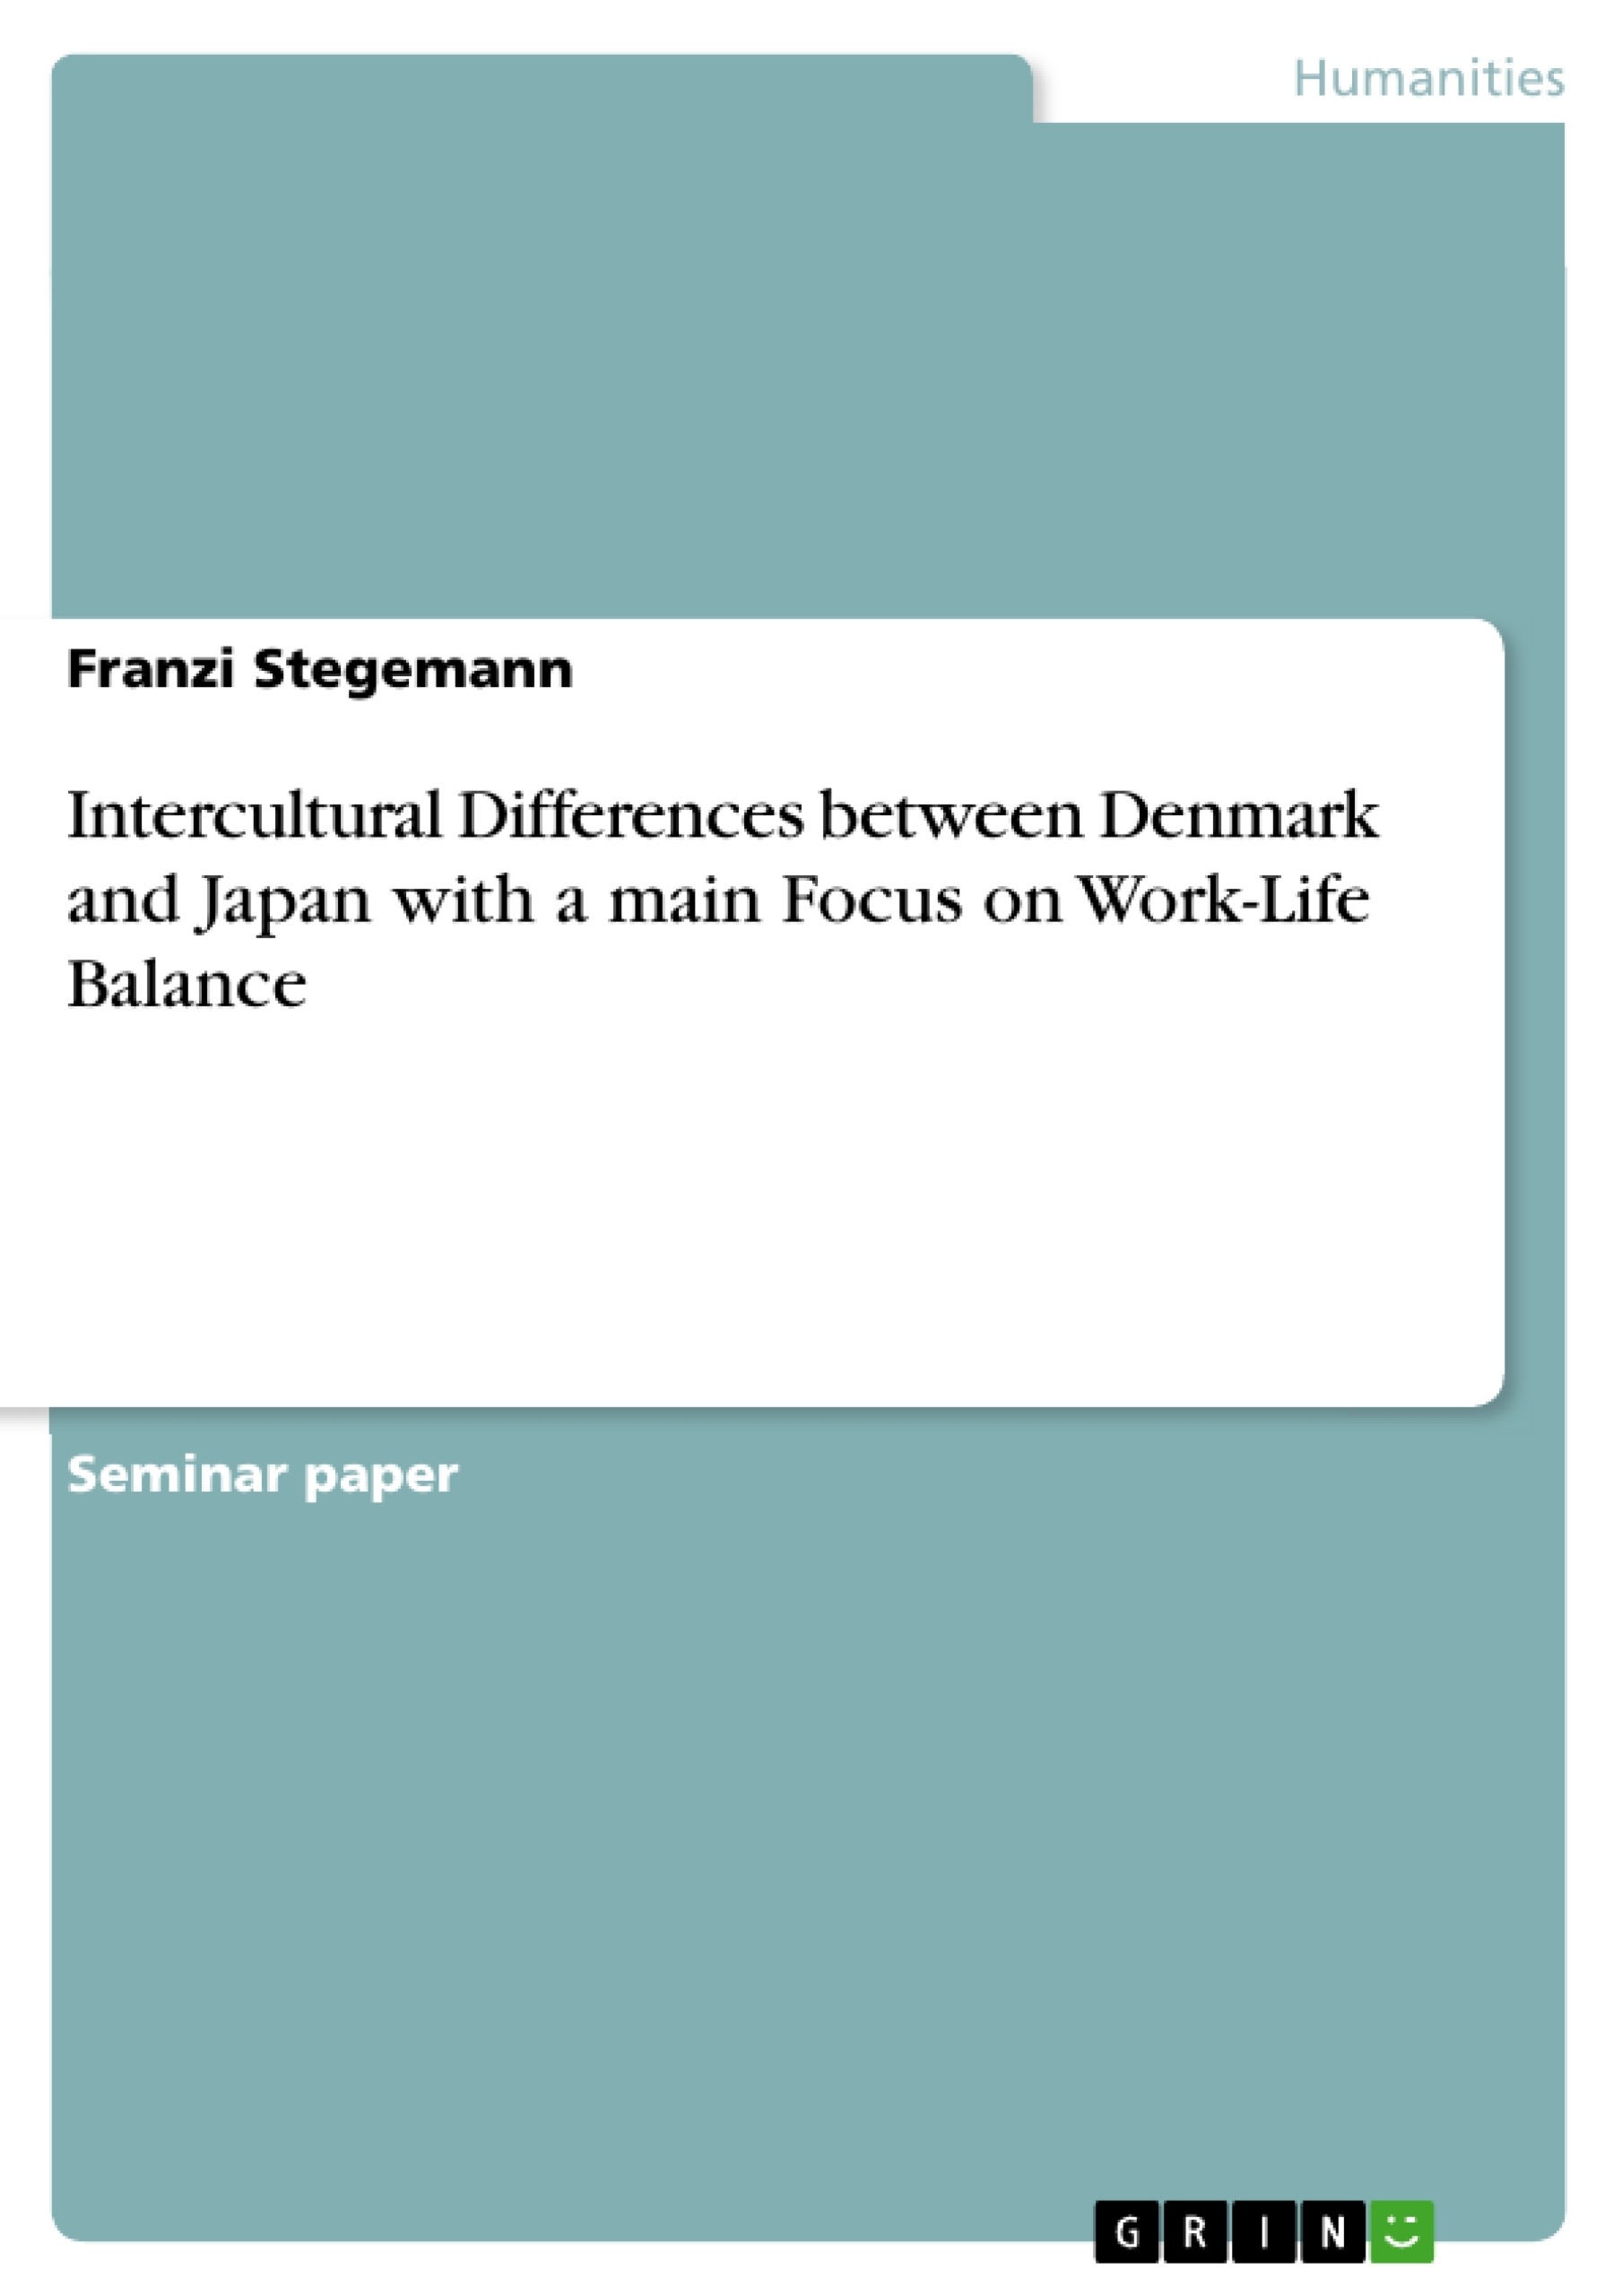 Title: Intercultural Differences between Denmark and Japan with a main Focus on Work-Life Balance